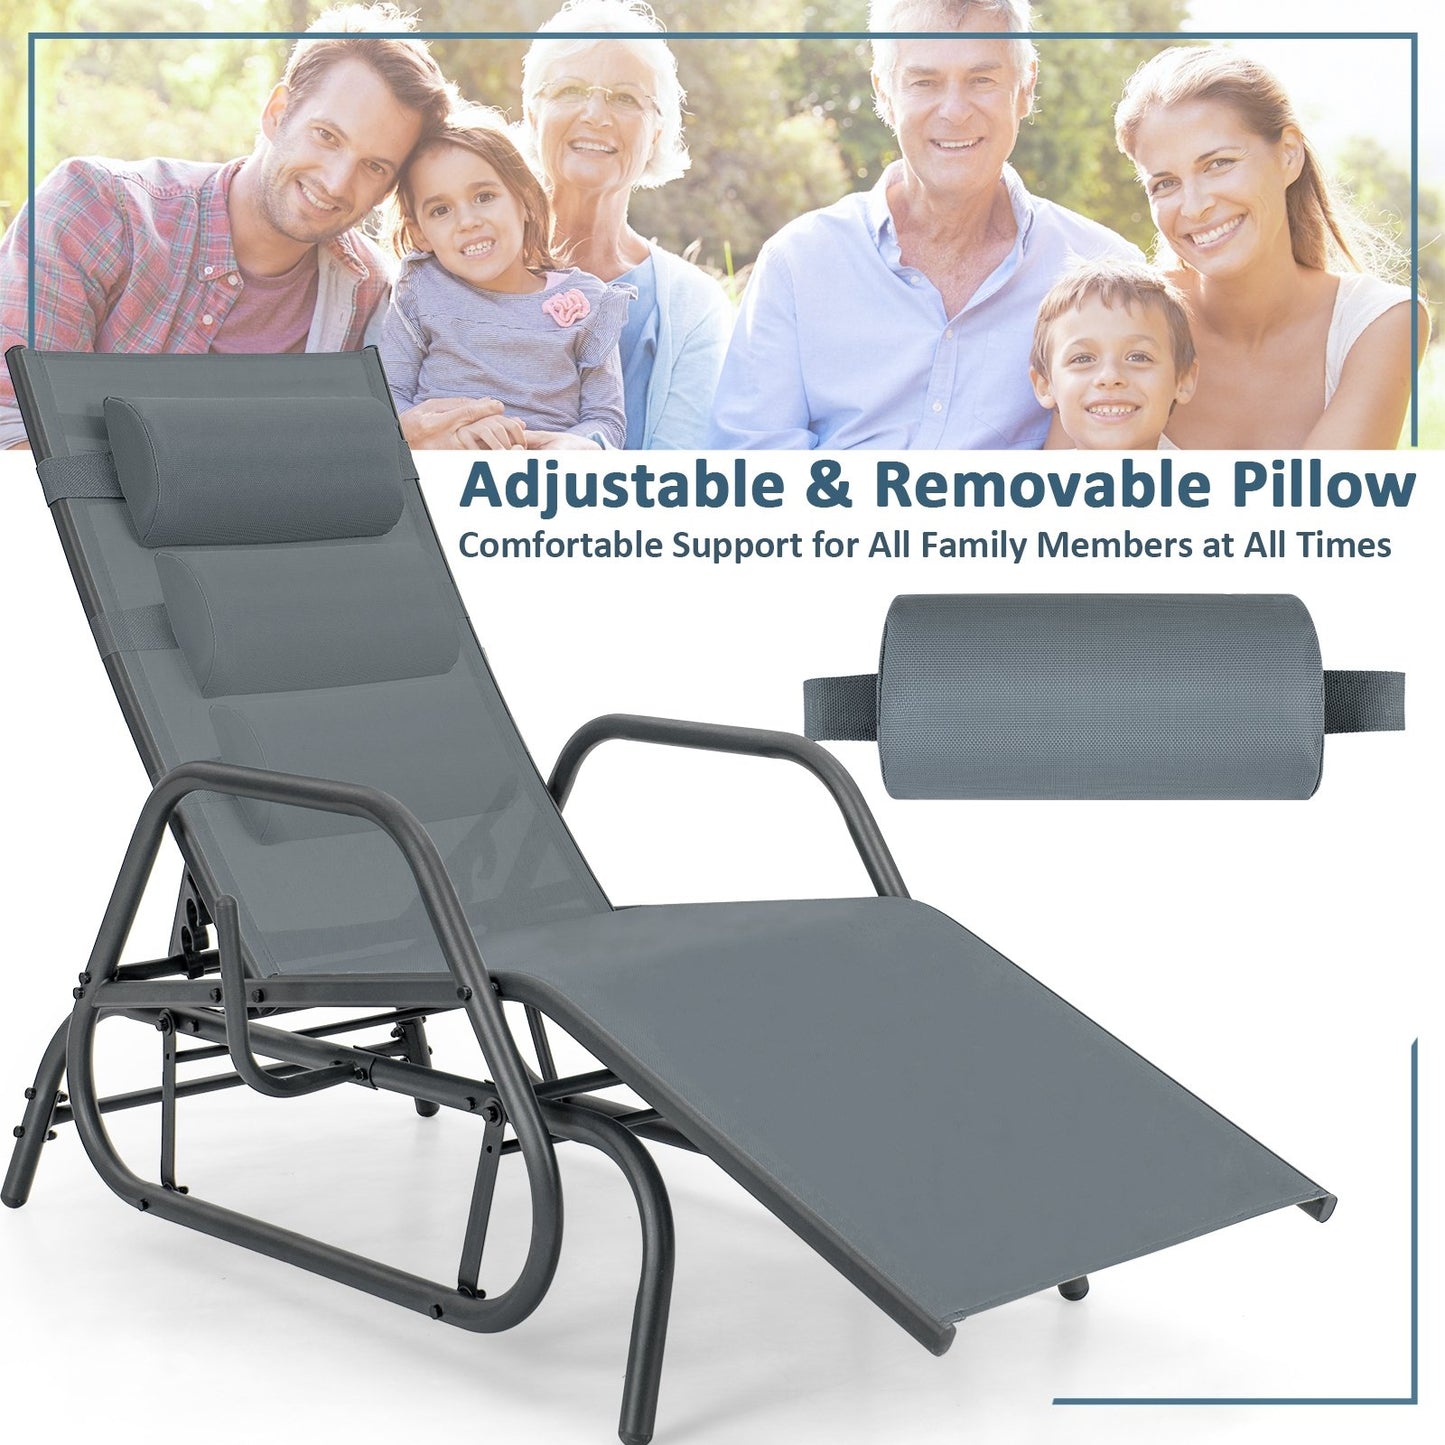 Outdoor Chaise Lounge Glider Chair with Armrests and Pillow, Gray at Gallery Canada